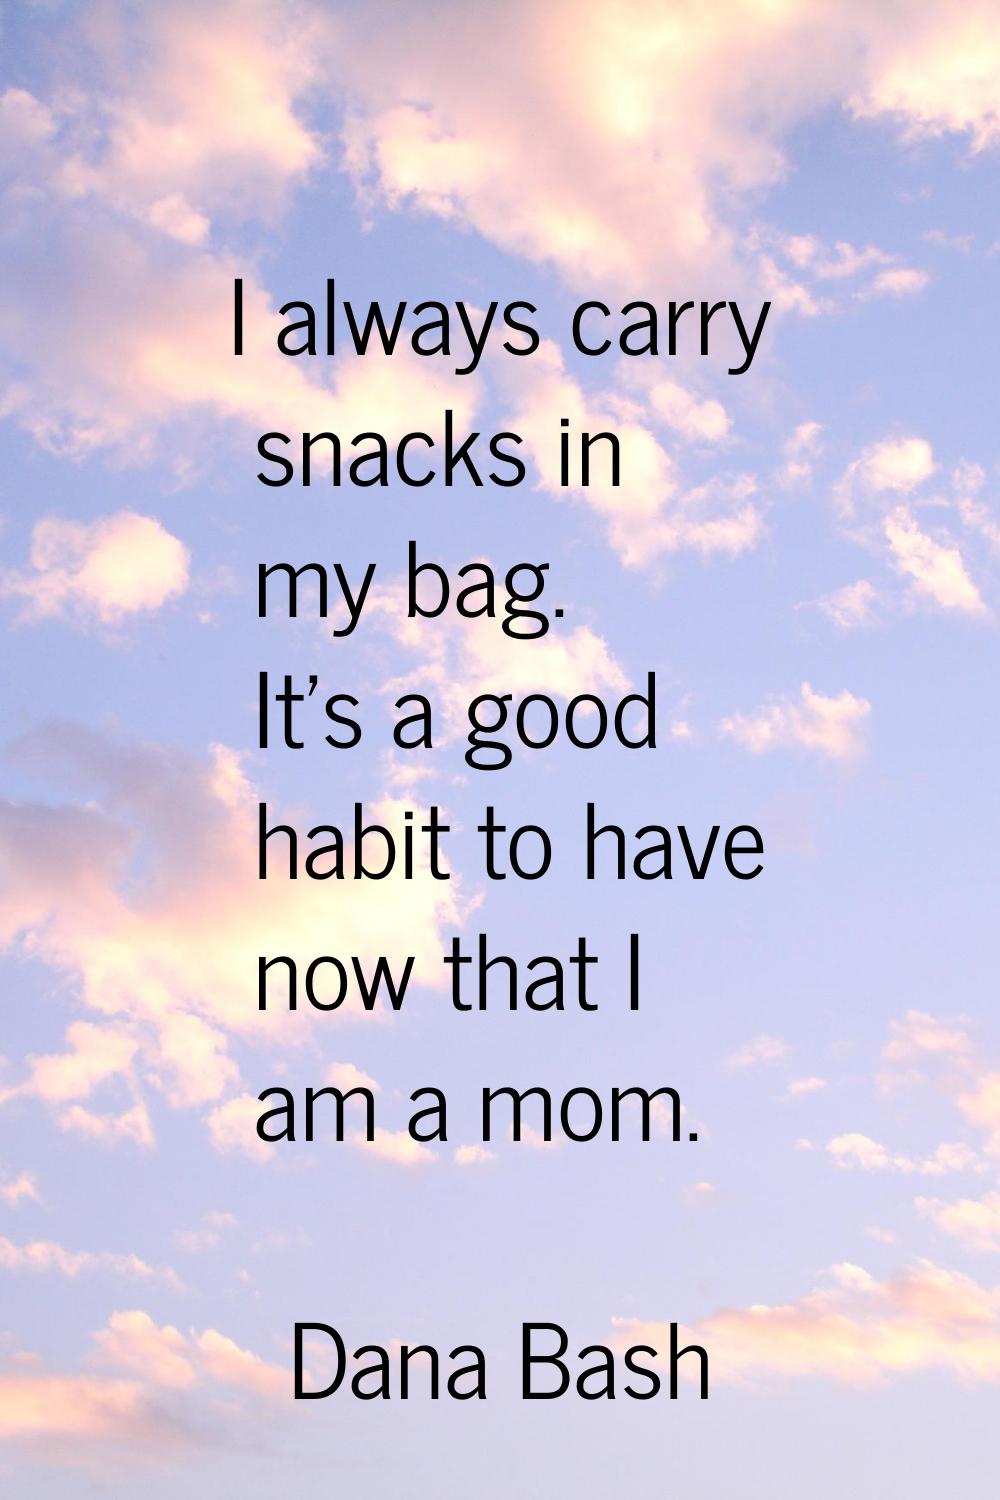 I always carry snacks in my bag. It's a good habit to have now that I am a mom.